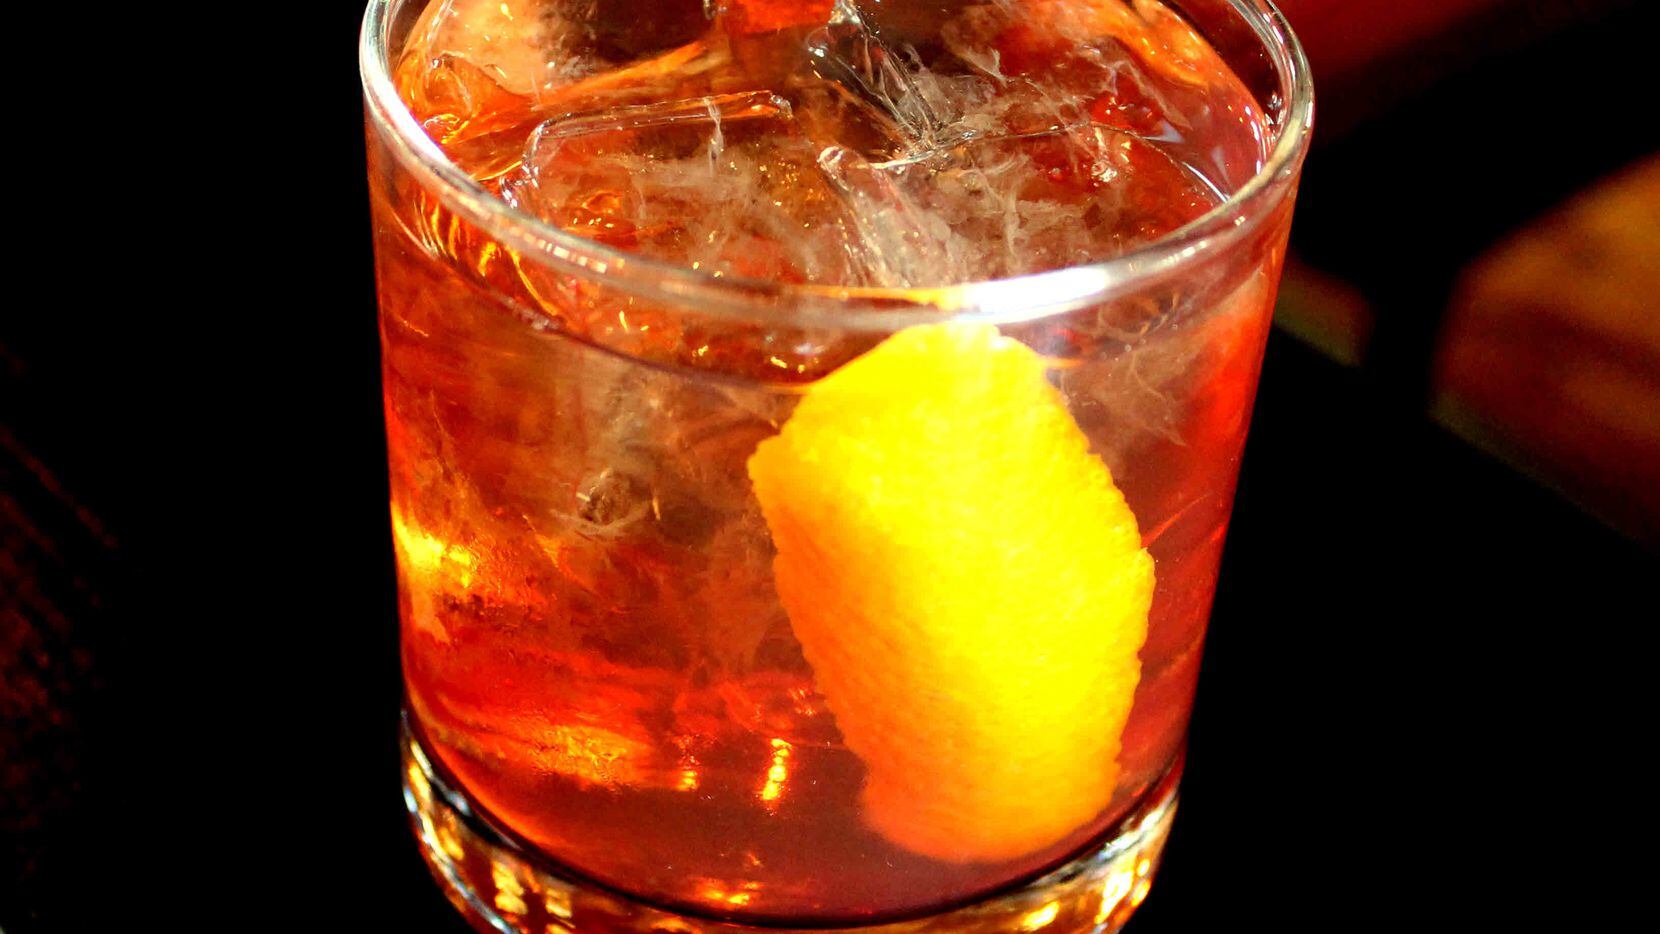 Foolish Games is the specialty drink for S.A.D. -- Singles Awareness Day -- on Feb. 15 at...